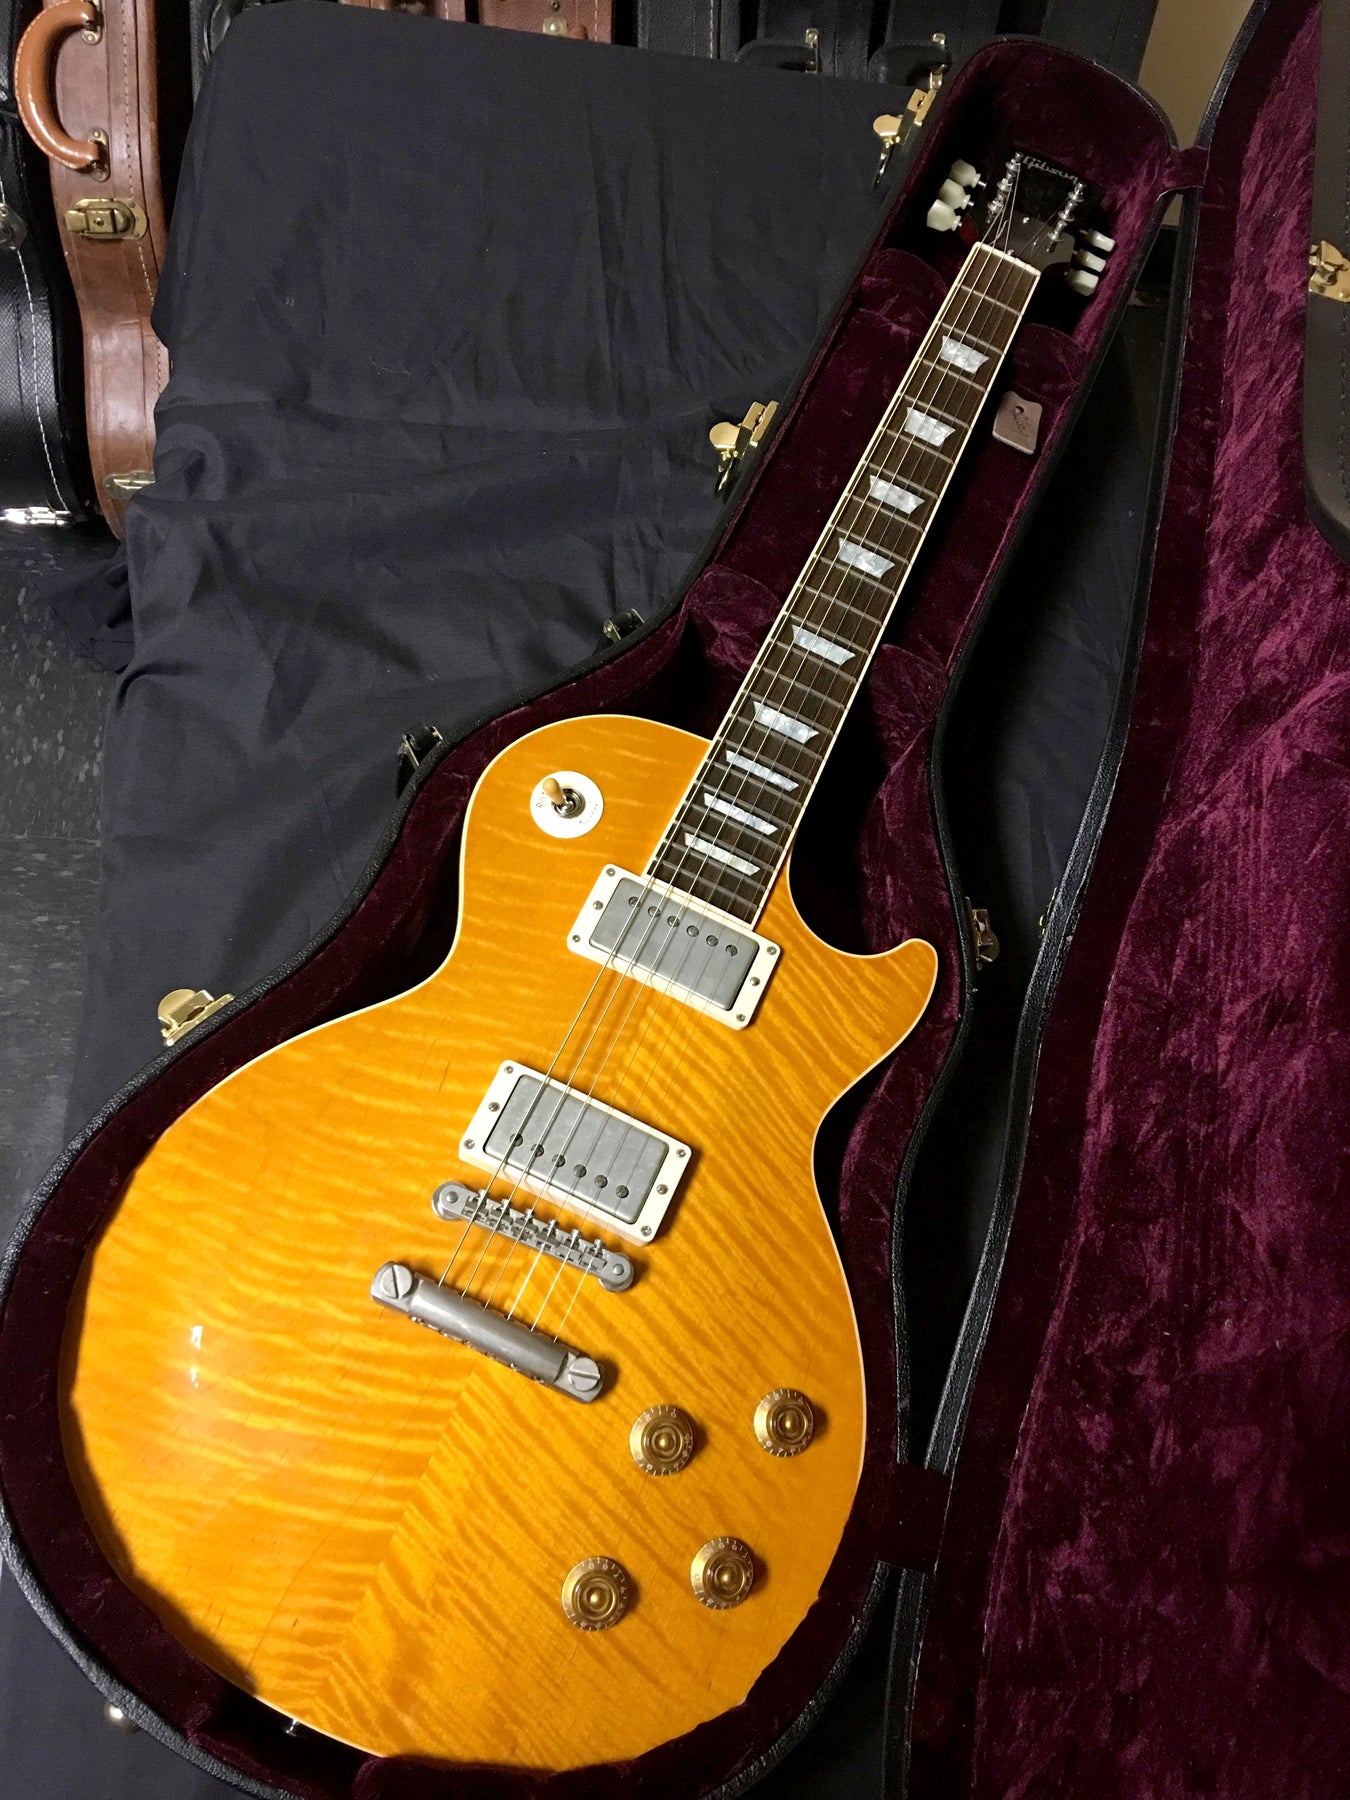 Les Flame Top Jimmy Wallace Guitars